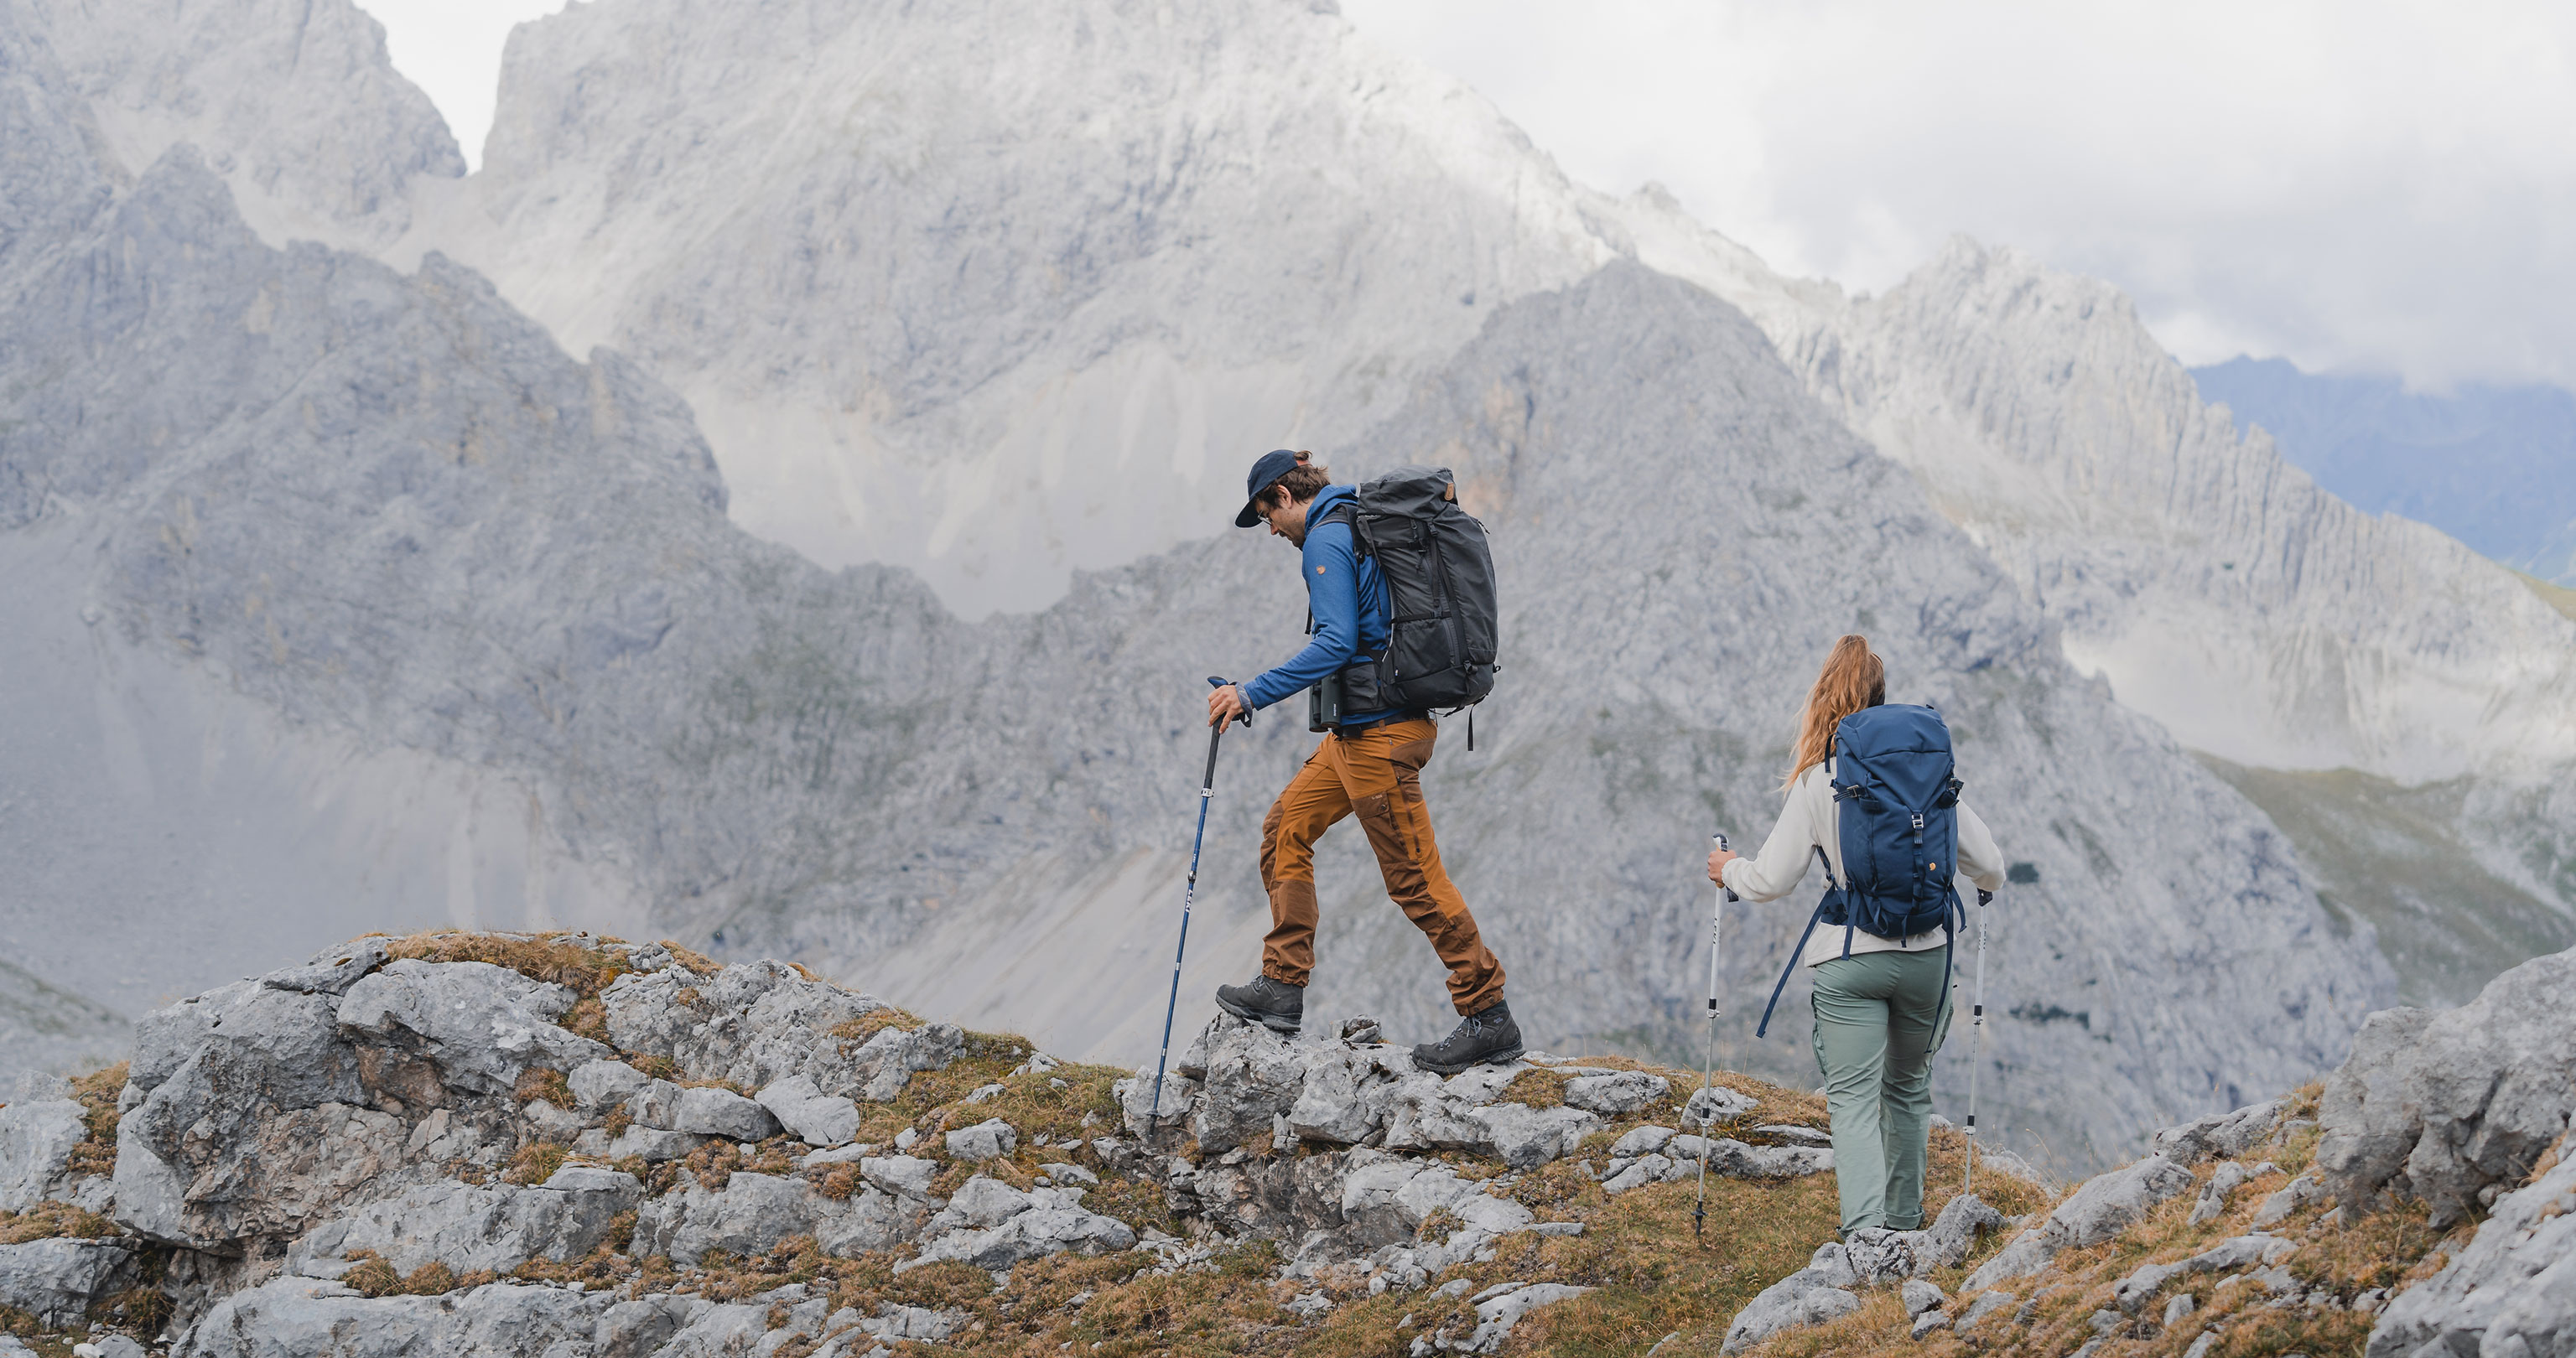 A couple hiking in the mountains wearing Hanwag Tatra II trekking boots